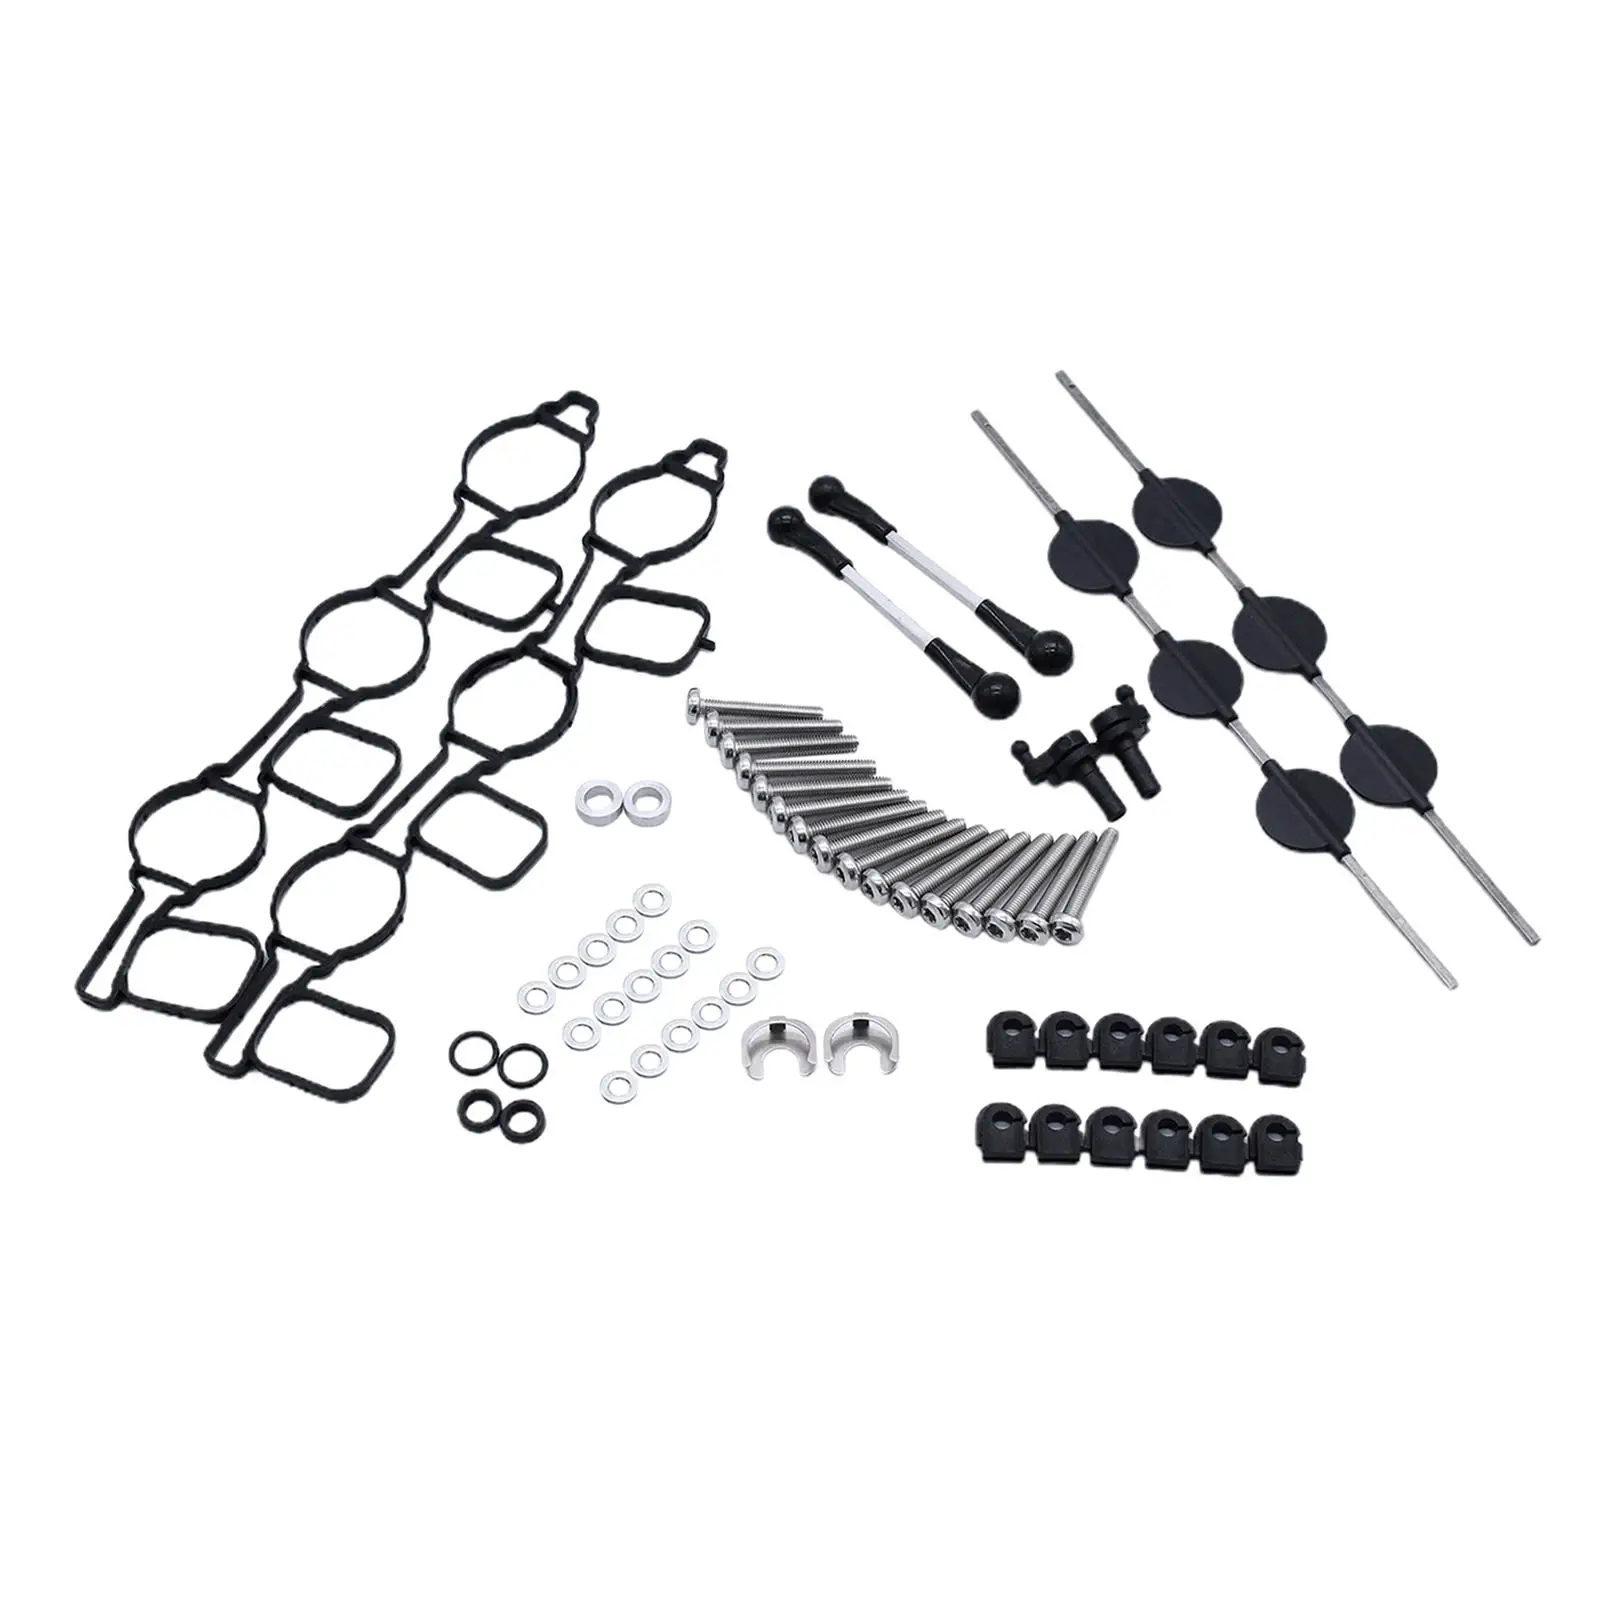 Inlet Intake Manifold Swirl Flaps Set Repairing Tools for AUDI A4 A8 Q7 for VW 2.7 3.0 059129711CK 059129712 Car Auto Kit